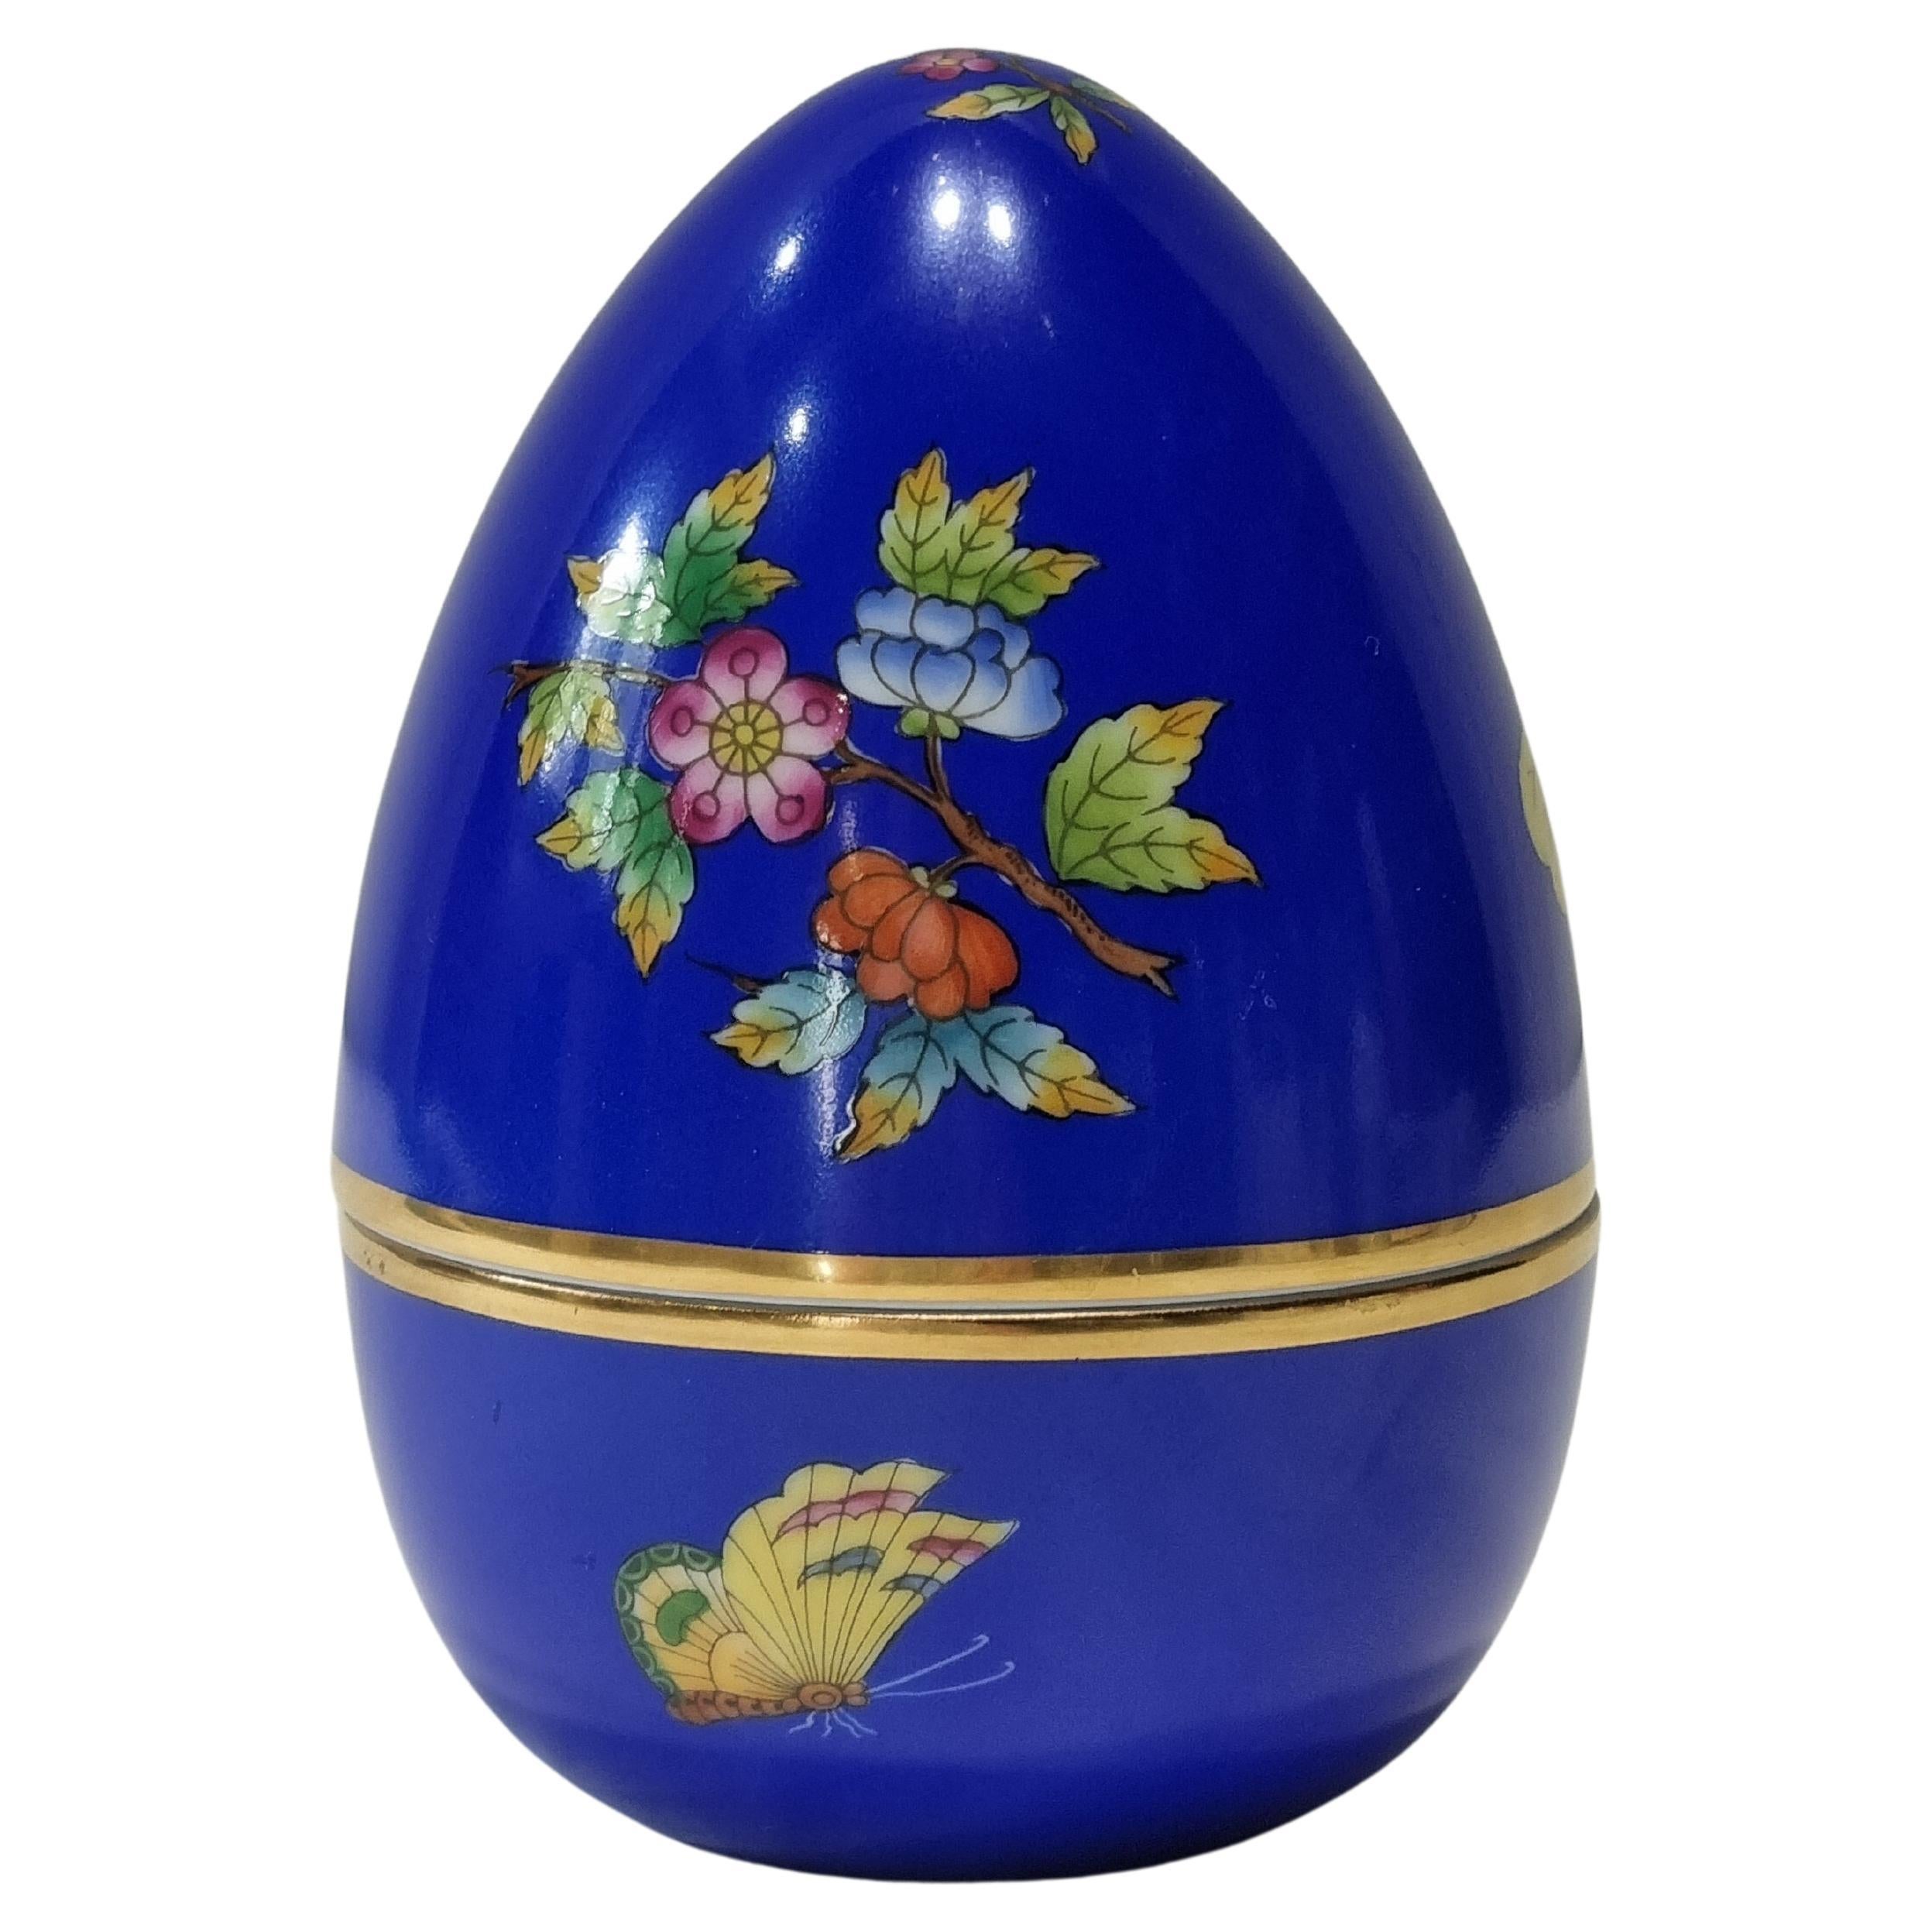 Herend "Victoria" Hand Painted Porcelain Egg Box, Hungary, 2022, New